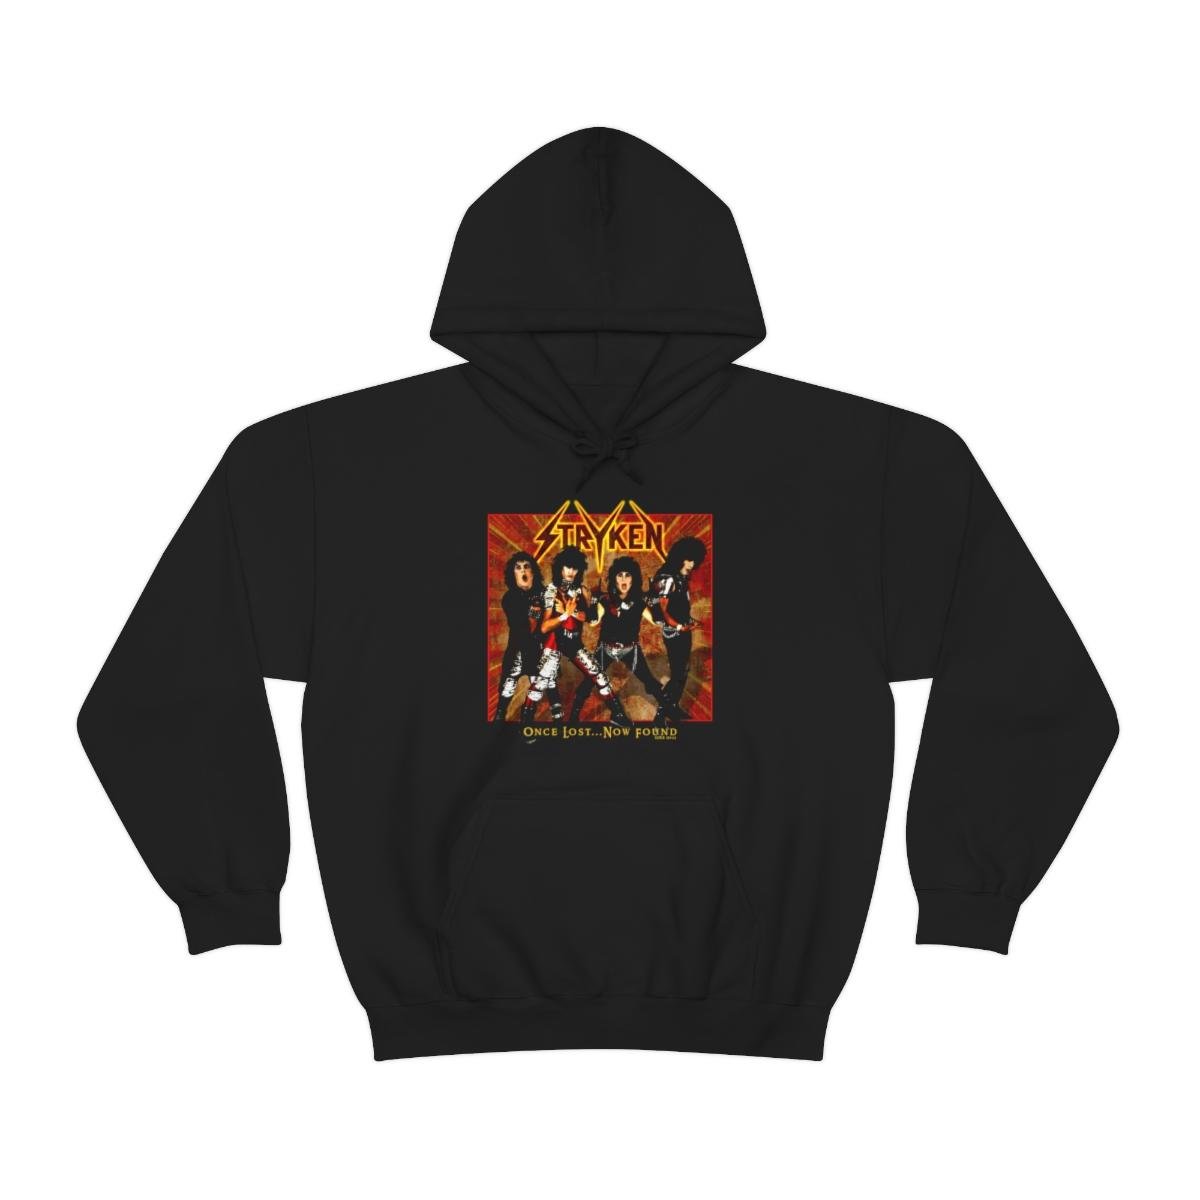 Stryken – Once Lost Now Found Pullover Hooded Sweatshirt